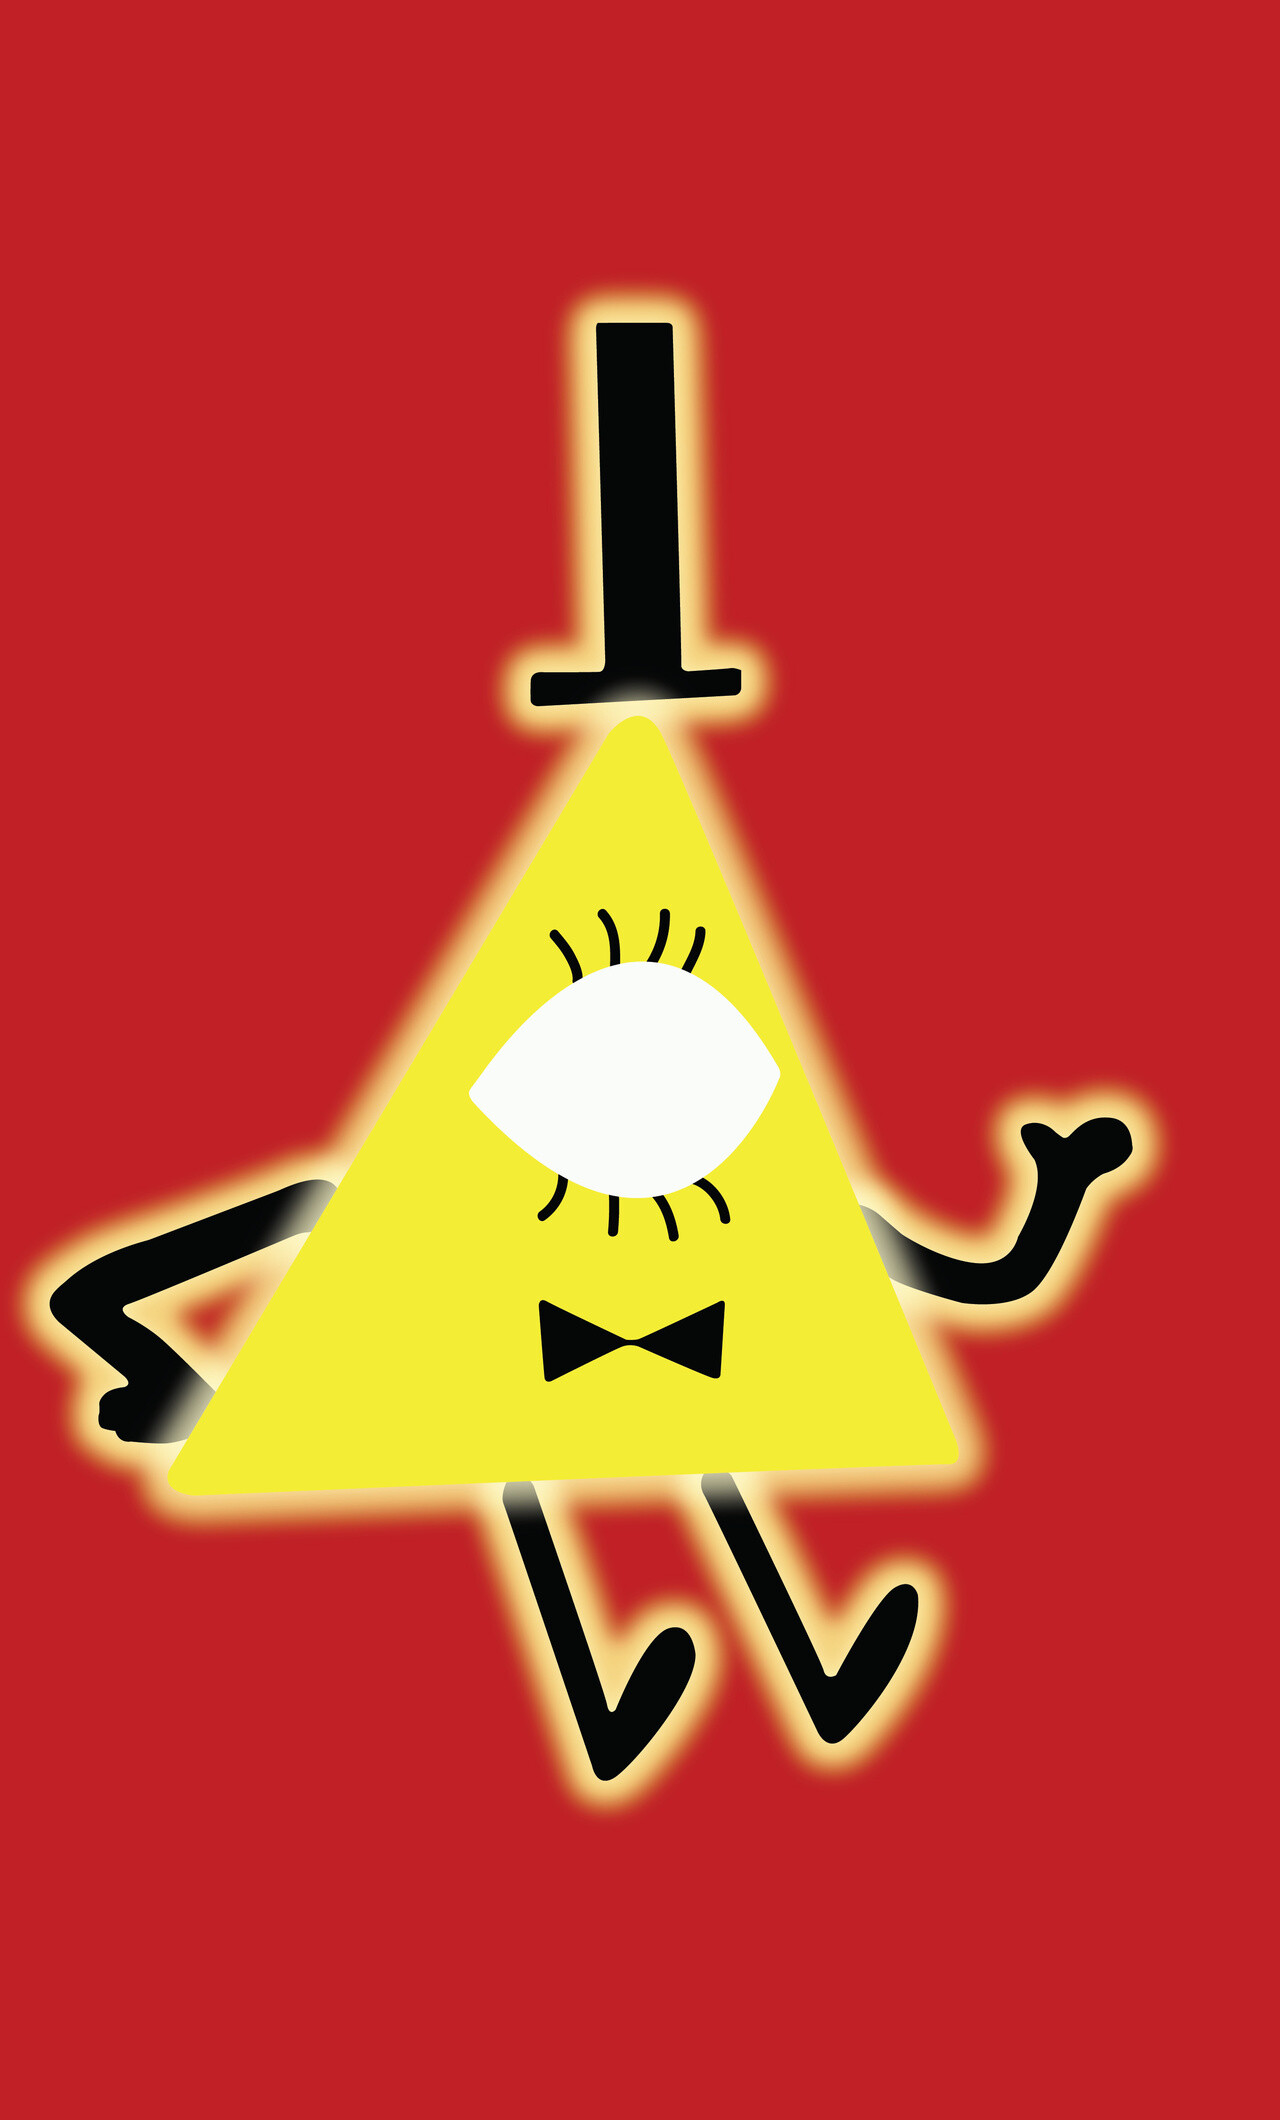 Gravity Falls: Bill Cipher, a one-eyed yellow triangle wearing a top hat and a bow tie. 1280x2120 HD Background.